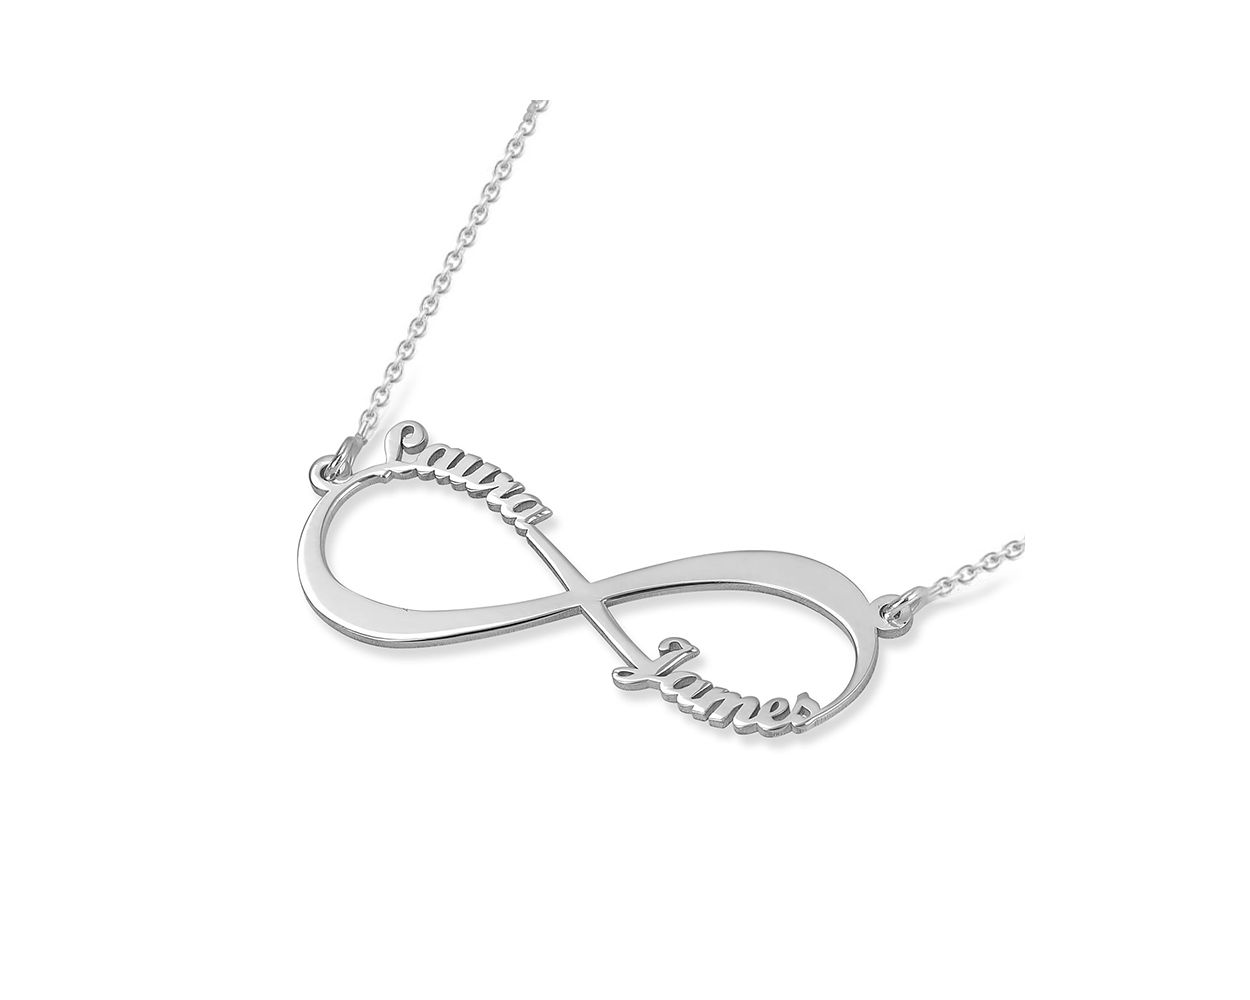 Together for Infinity Personalized Name Necklace Customizable 2 Sterling Silver Rectangular Pendant Necklace Includes a Sterling Silver Infinity Symbol Charm and Sterling Silver Chain of your choice 